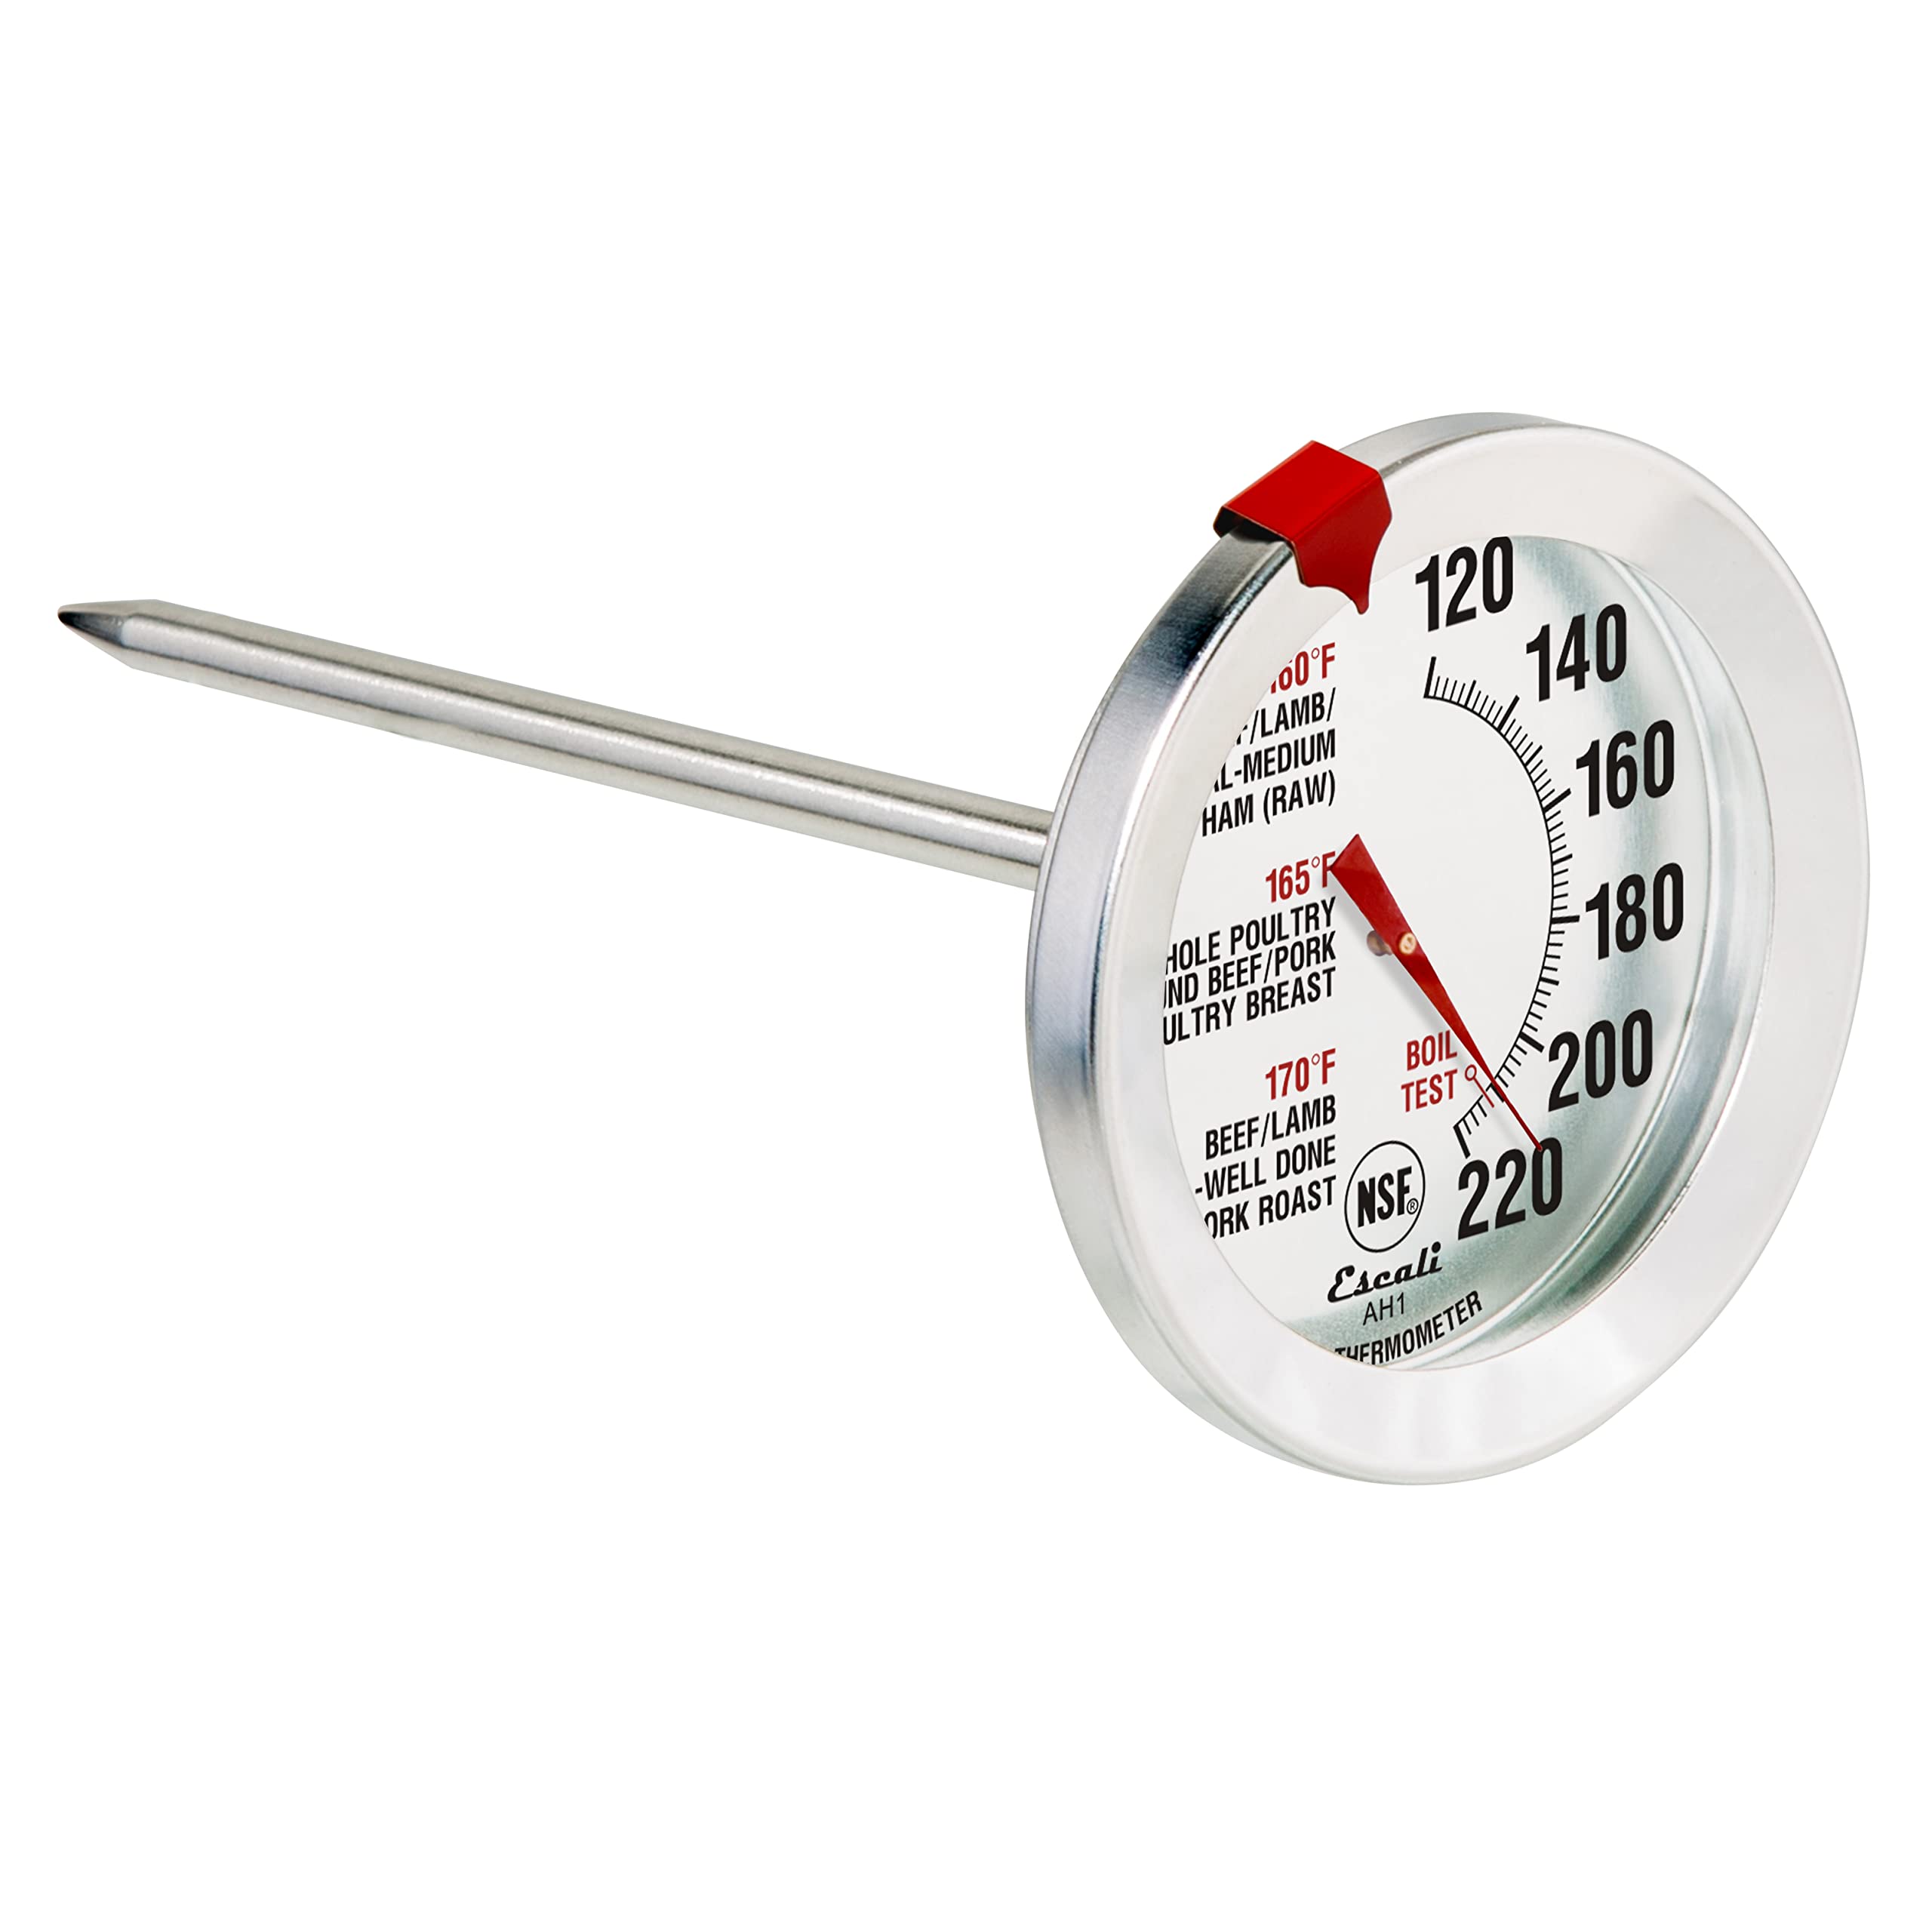 Escali AH1 Stainless Steel Oven Safe Meat Thermometer, Extra Large 2.5-inches Dial, Temperature Labeled for Beef, Poultry, Pork, and Veal Silver NSF Certified